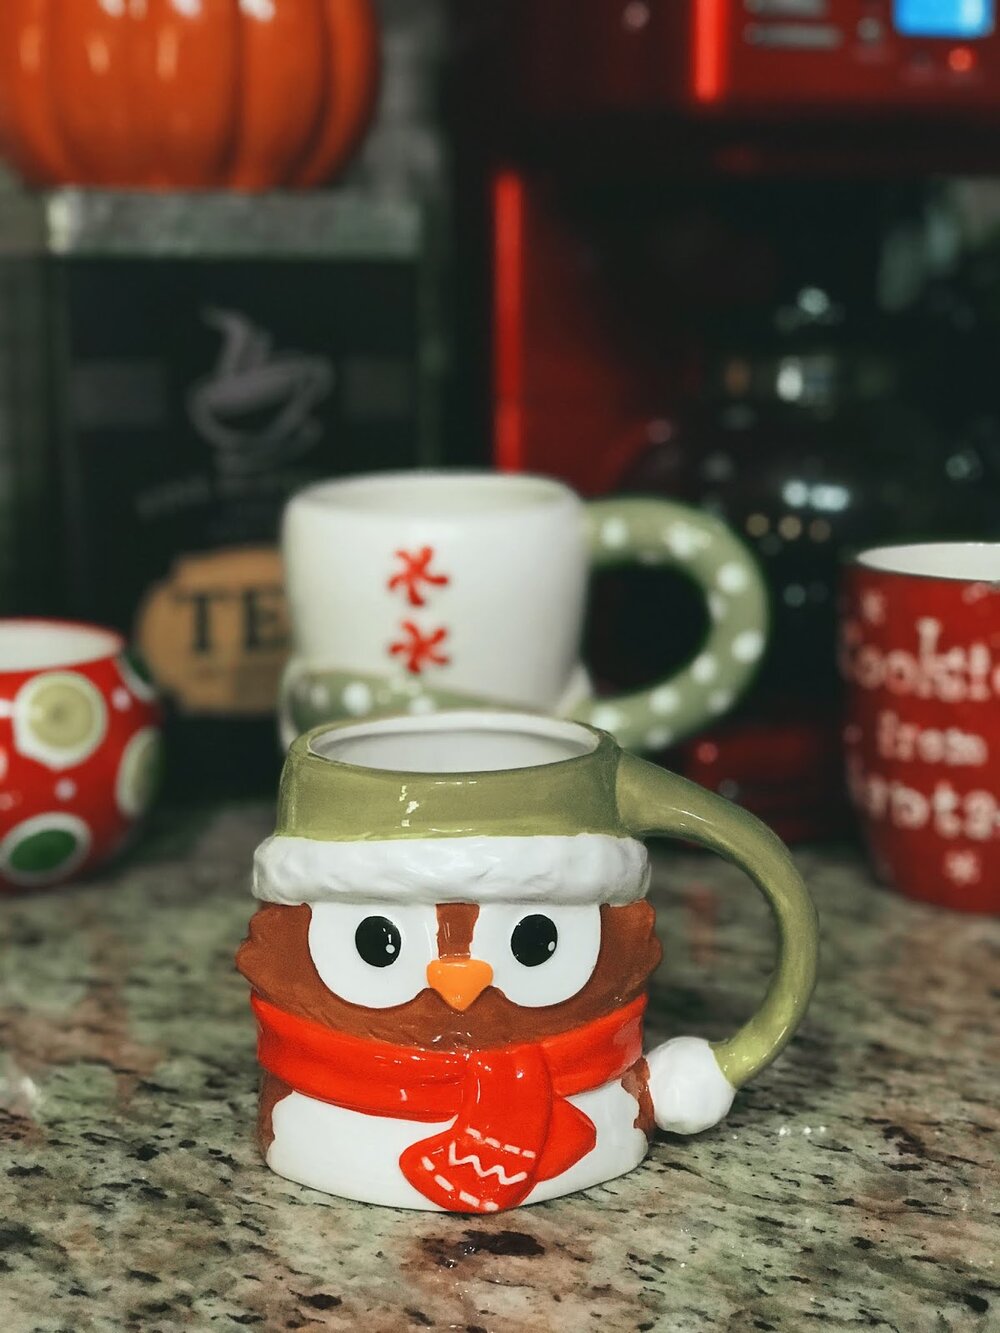 A Look AT ALL Of My Cozy And Festive Christmas Coffee Mugs That I Will Be Using This Season!